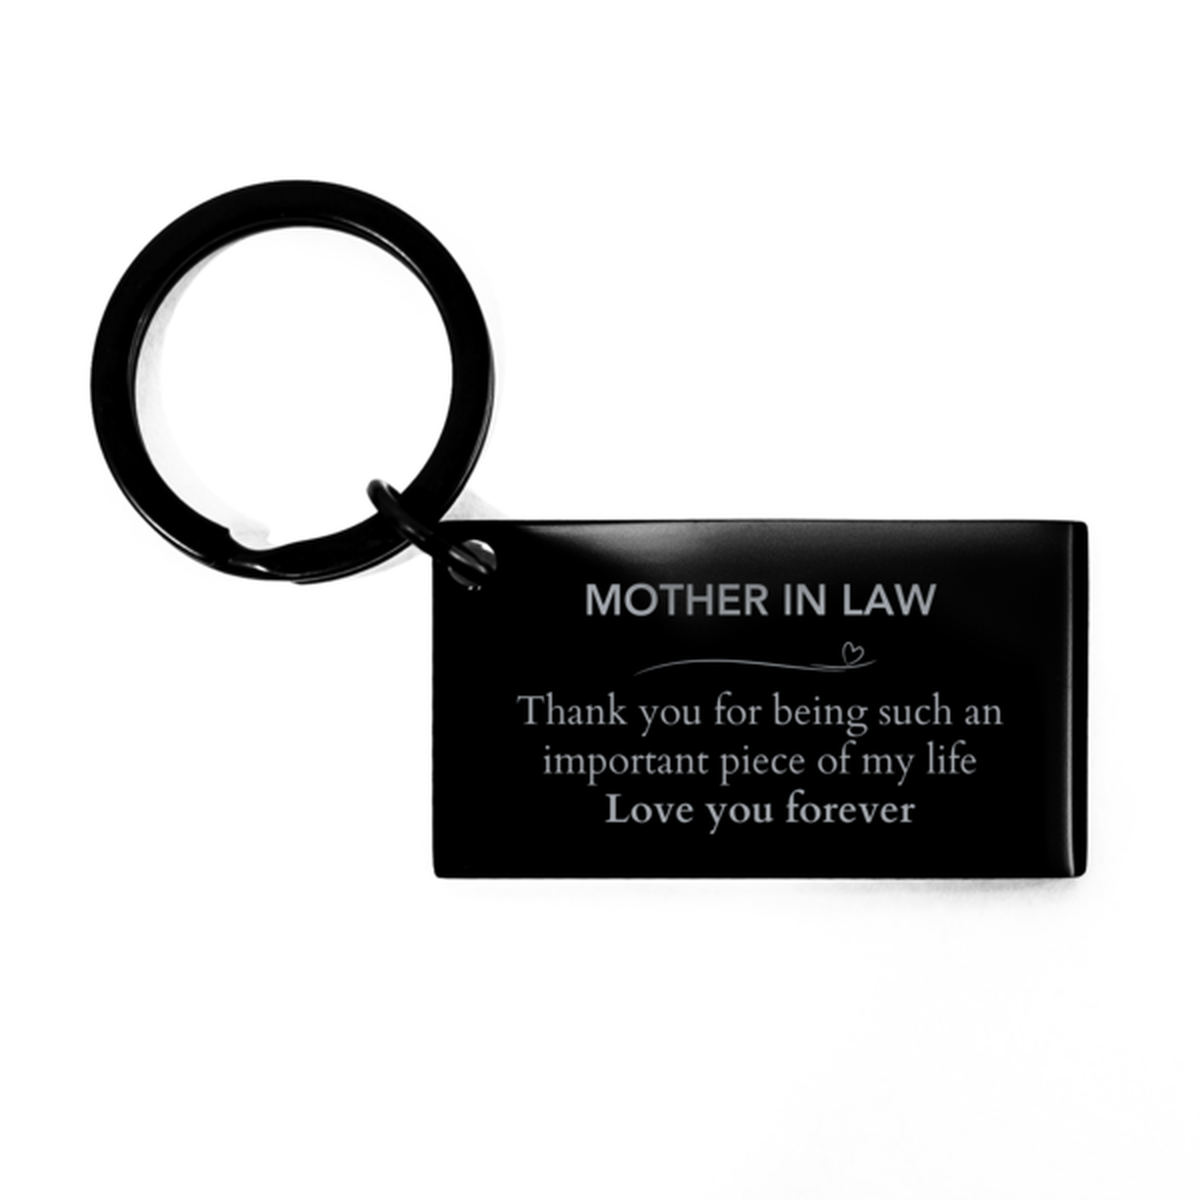 Appropriate Mother In Law Keychain Epic Birthday Gifts for Mother In Law Thank you for being such an important piece of my life Mother In Law Christmas Mothers Fathers Day